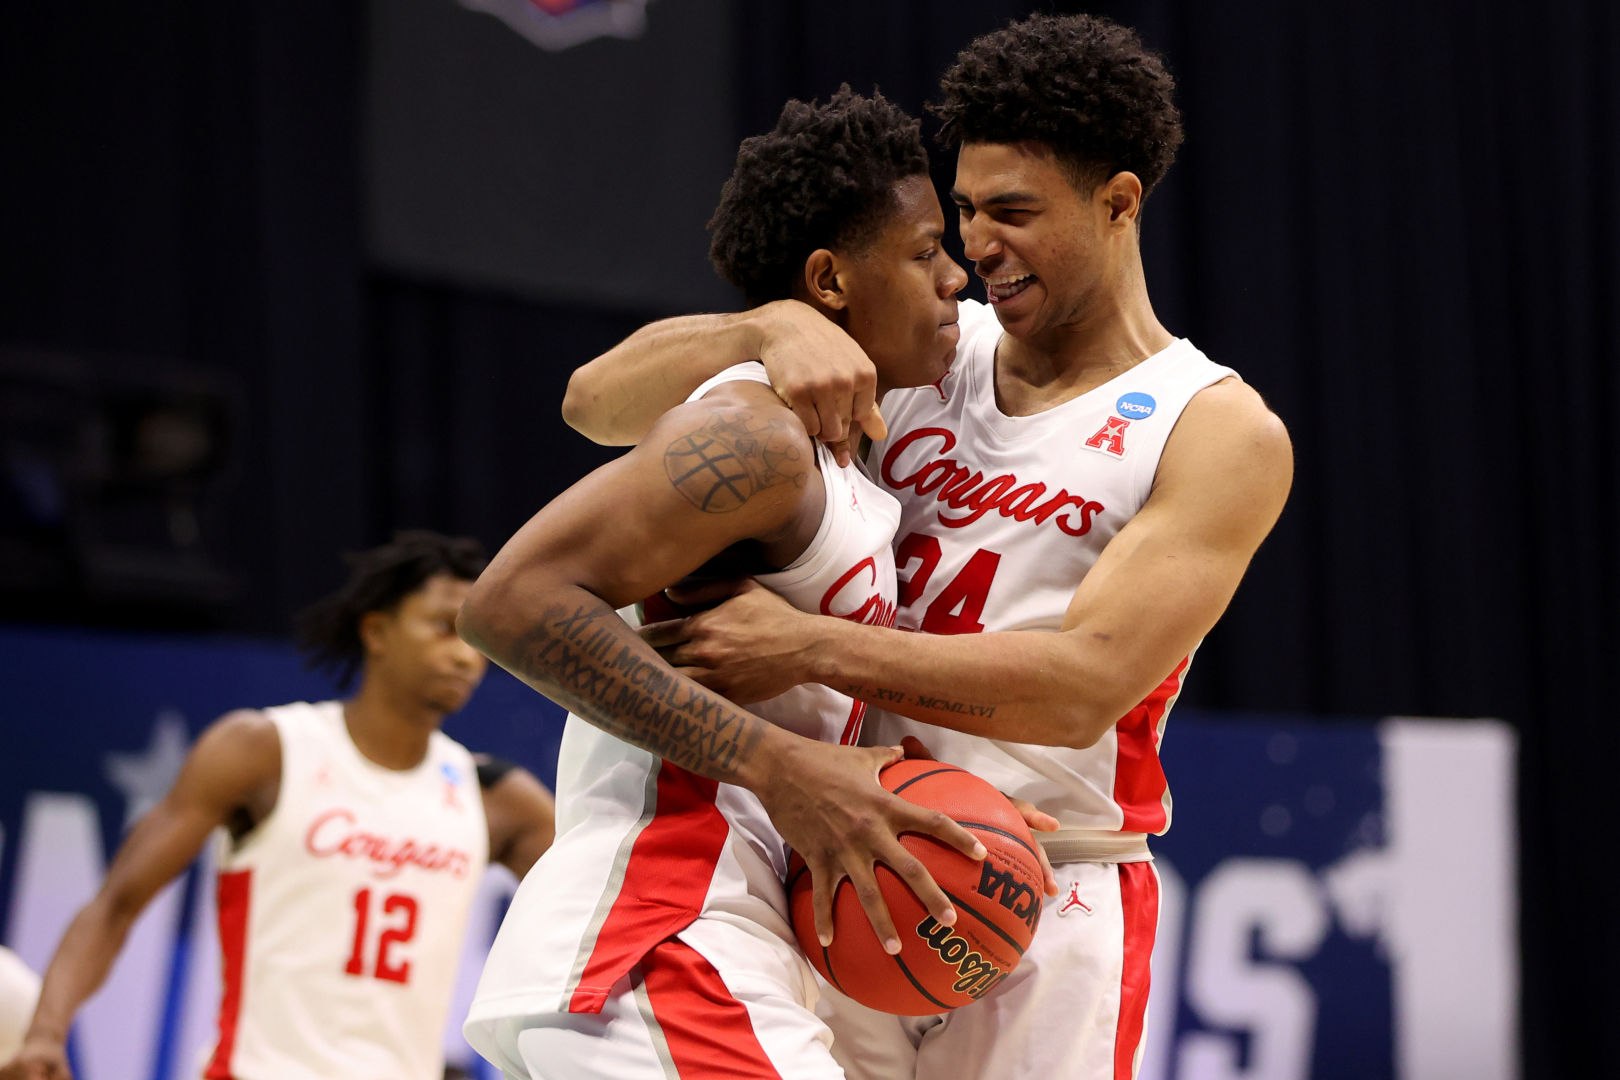 INDIANAPOLIS, IN - MARCH 21: Marcus Sasser #0 and Quentin Grimes #24 of the UH Cougars celebrate their victory over the Rutgers Scarlet Knights in the second round of the 2021 NCAA Division I Men’s Basketball Tournament held at Lucas Oil Stadium on March 21, 2021 in Indianapolis, Indiana. (Photo by Jamie Schwaberow/NCAA Photos via Getty Images)